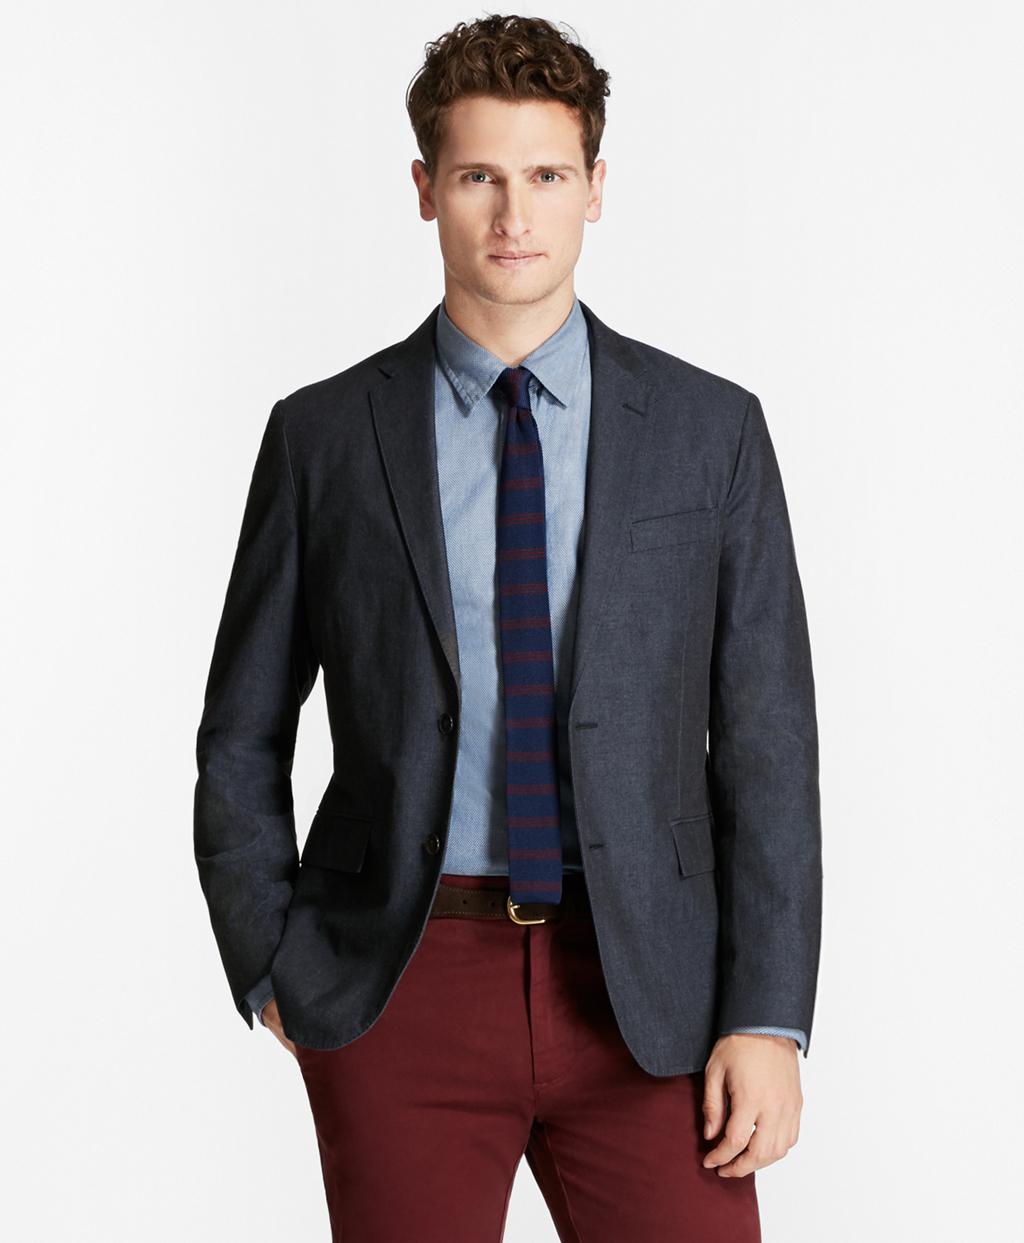 Brooks Brothers Cotton Twill Sport Coat in Indigo (Blue) for Men - Lyst